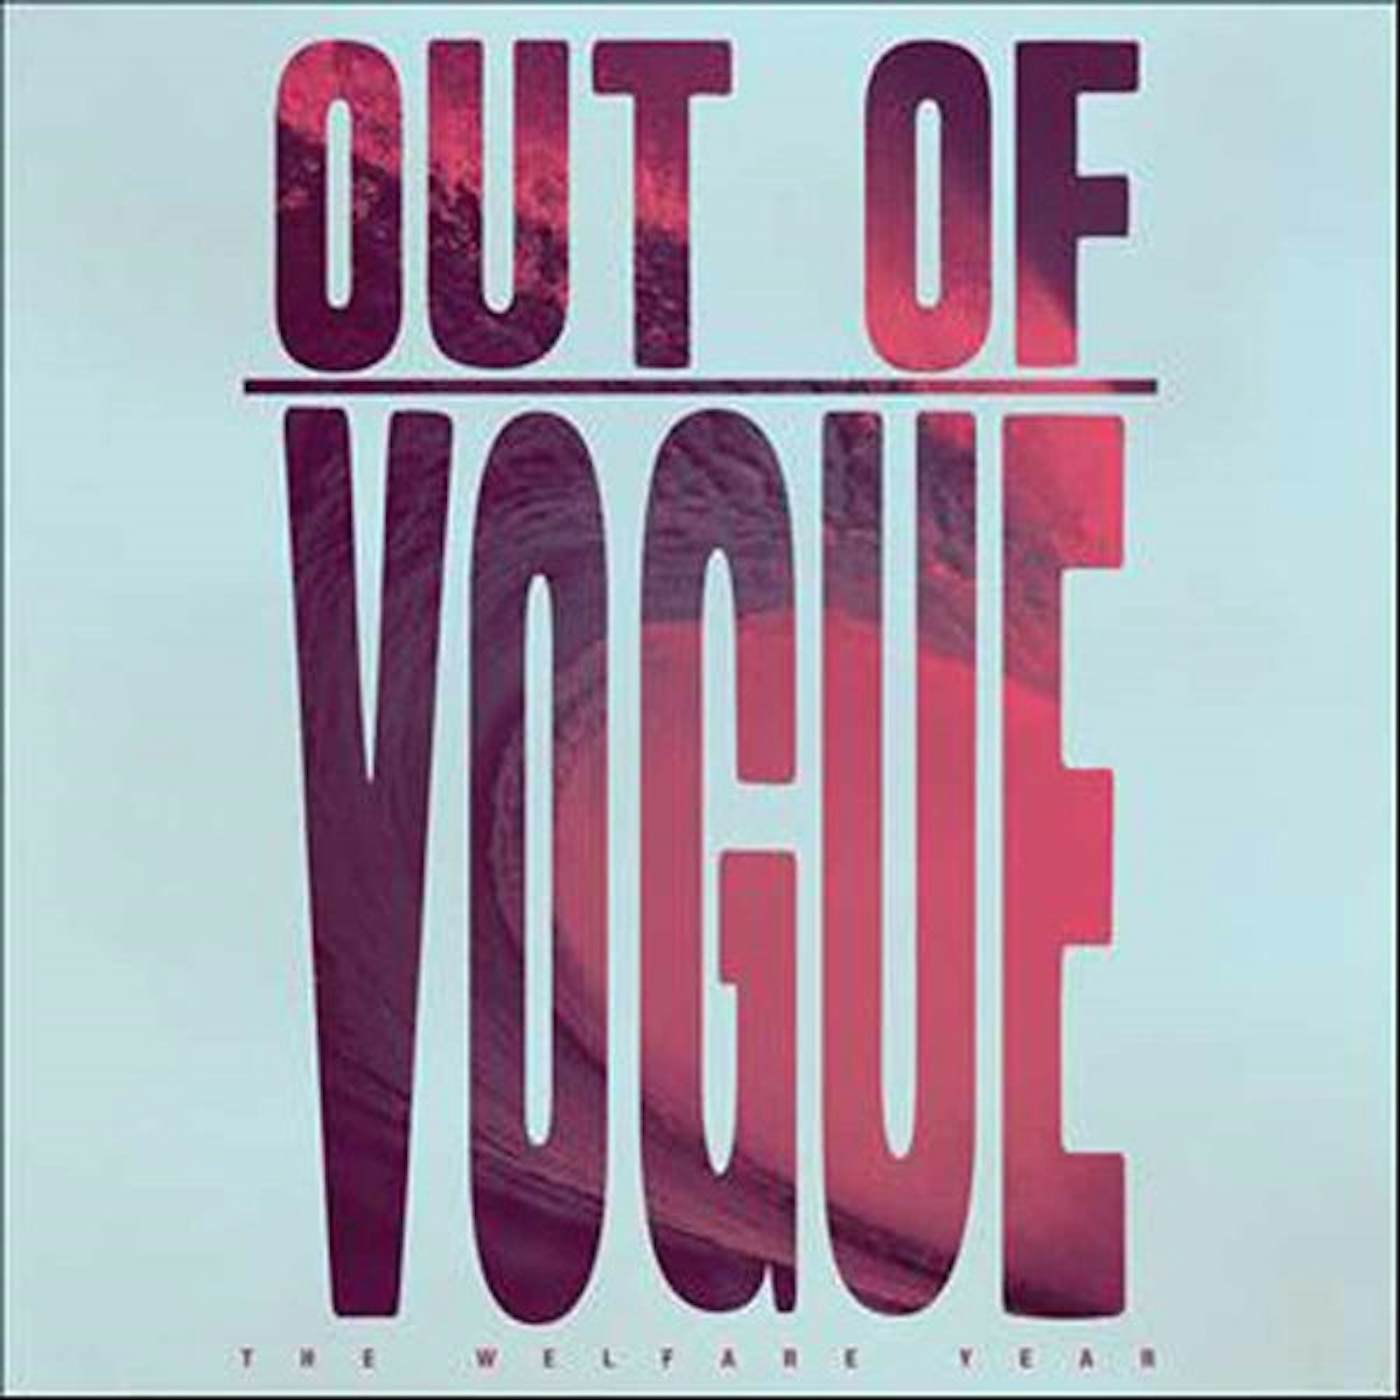 Out Of Vogue LP - The Welfare Year (Vinyl)